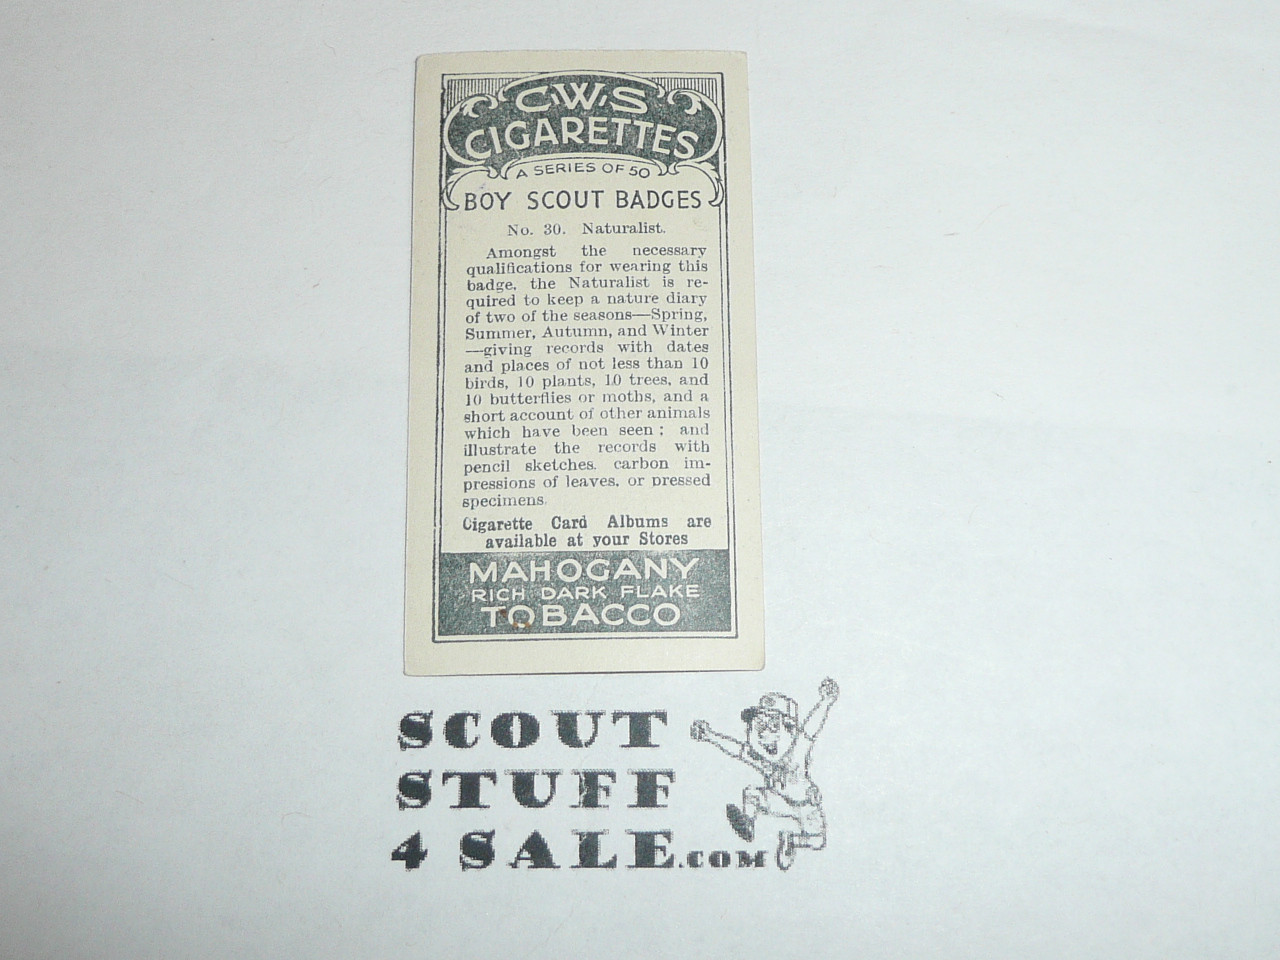 CWS Cigarette Company Premium Card, Boy Scout Badges Series of 50, Card #30 Naturalist, 1939